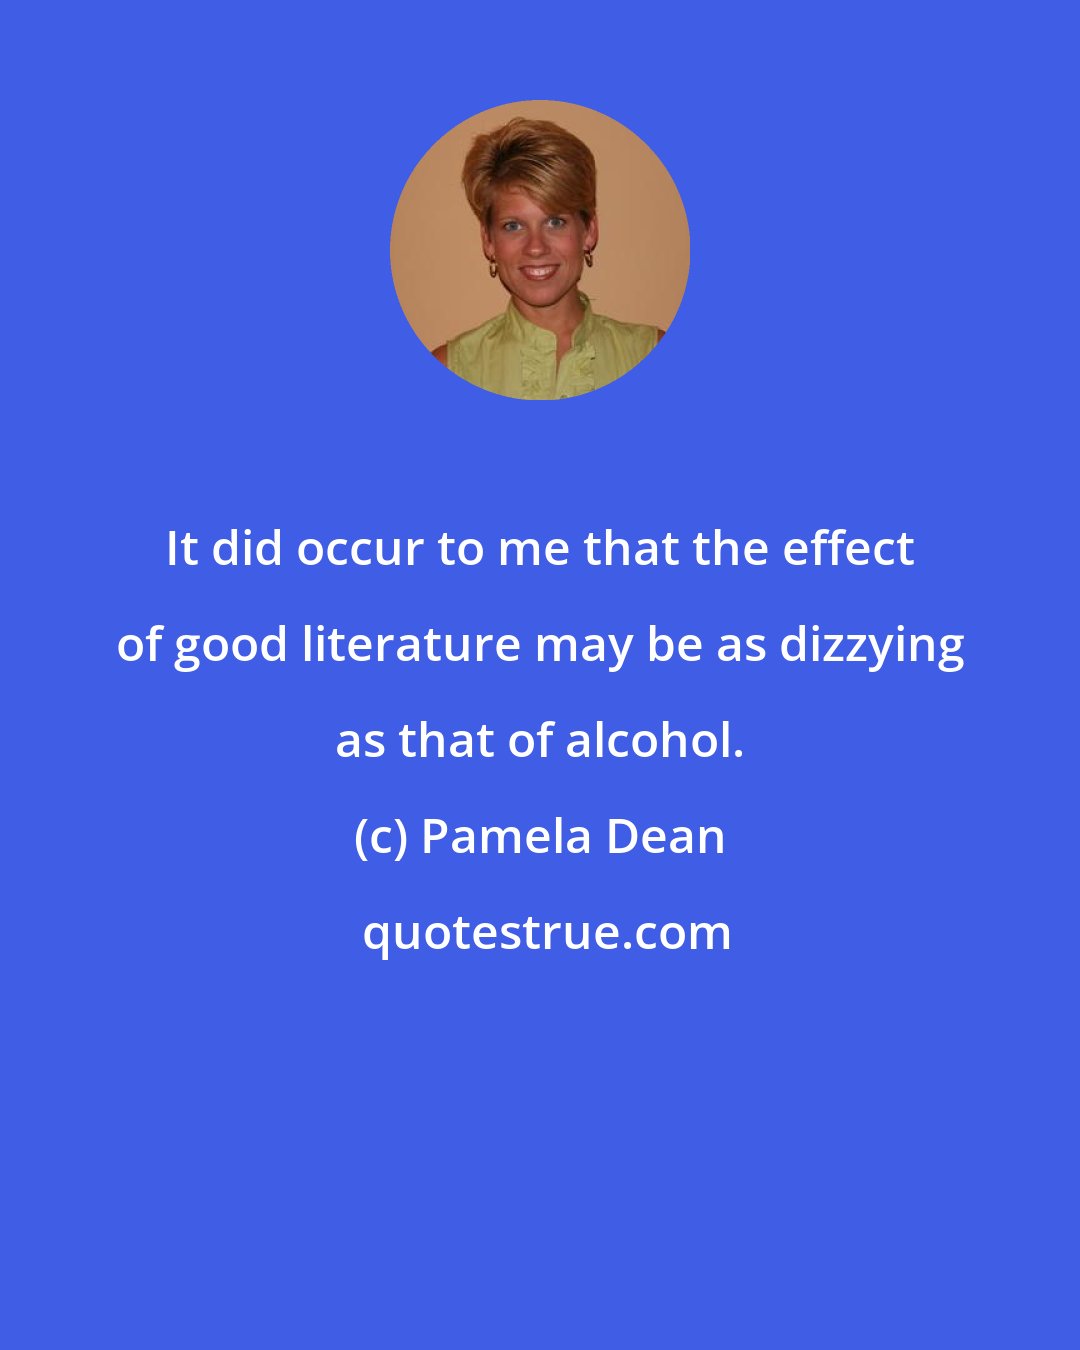 Pamela Dean: It did occur to me that the effect of good literature may be as dizzying as that of alcohol.